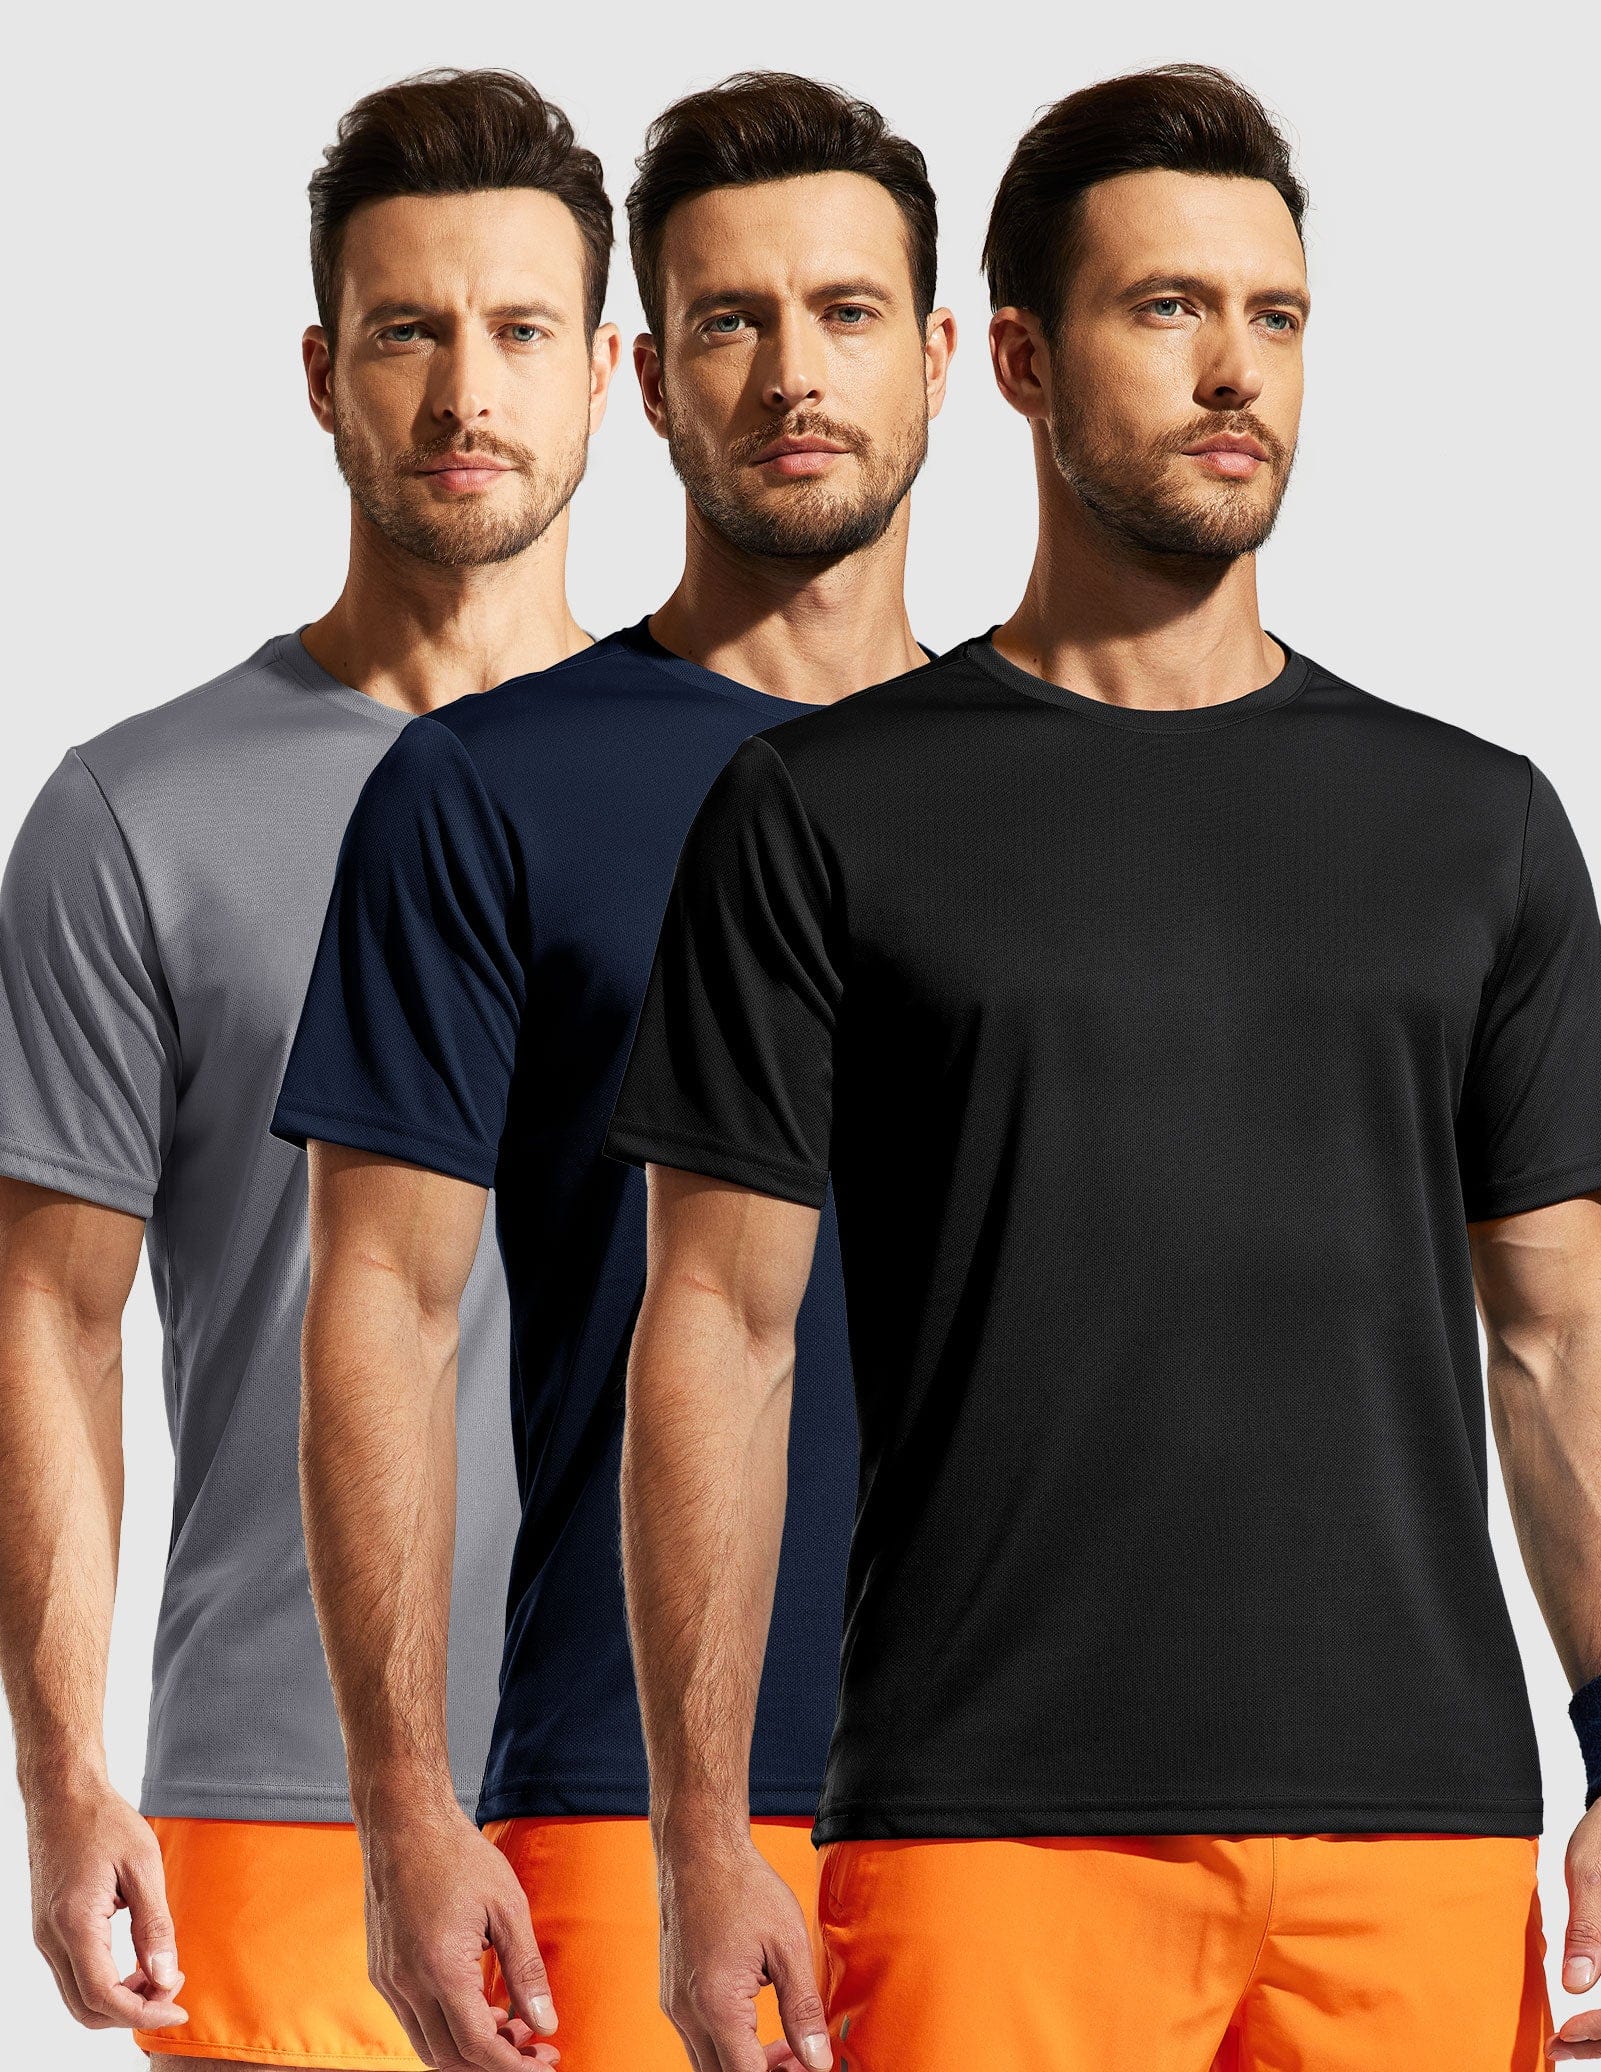 Men's Dry Fit Workout T-shirts for Gym Athletic Running Men Shirts MIER